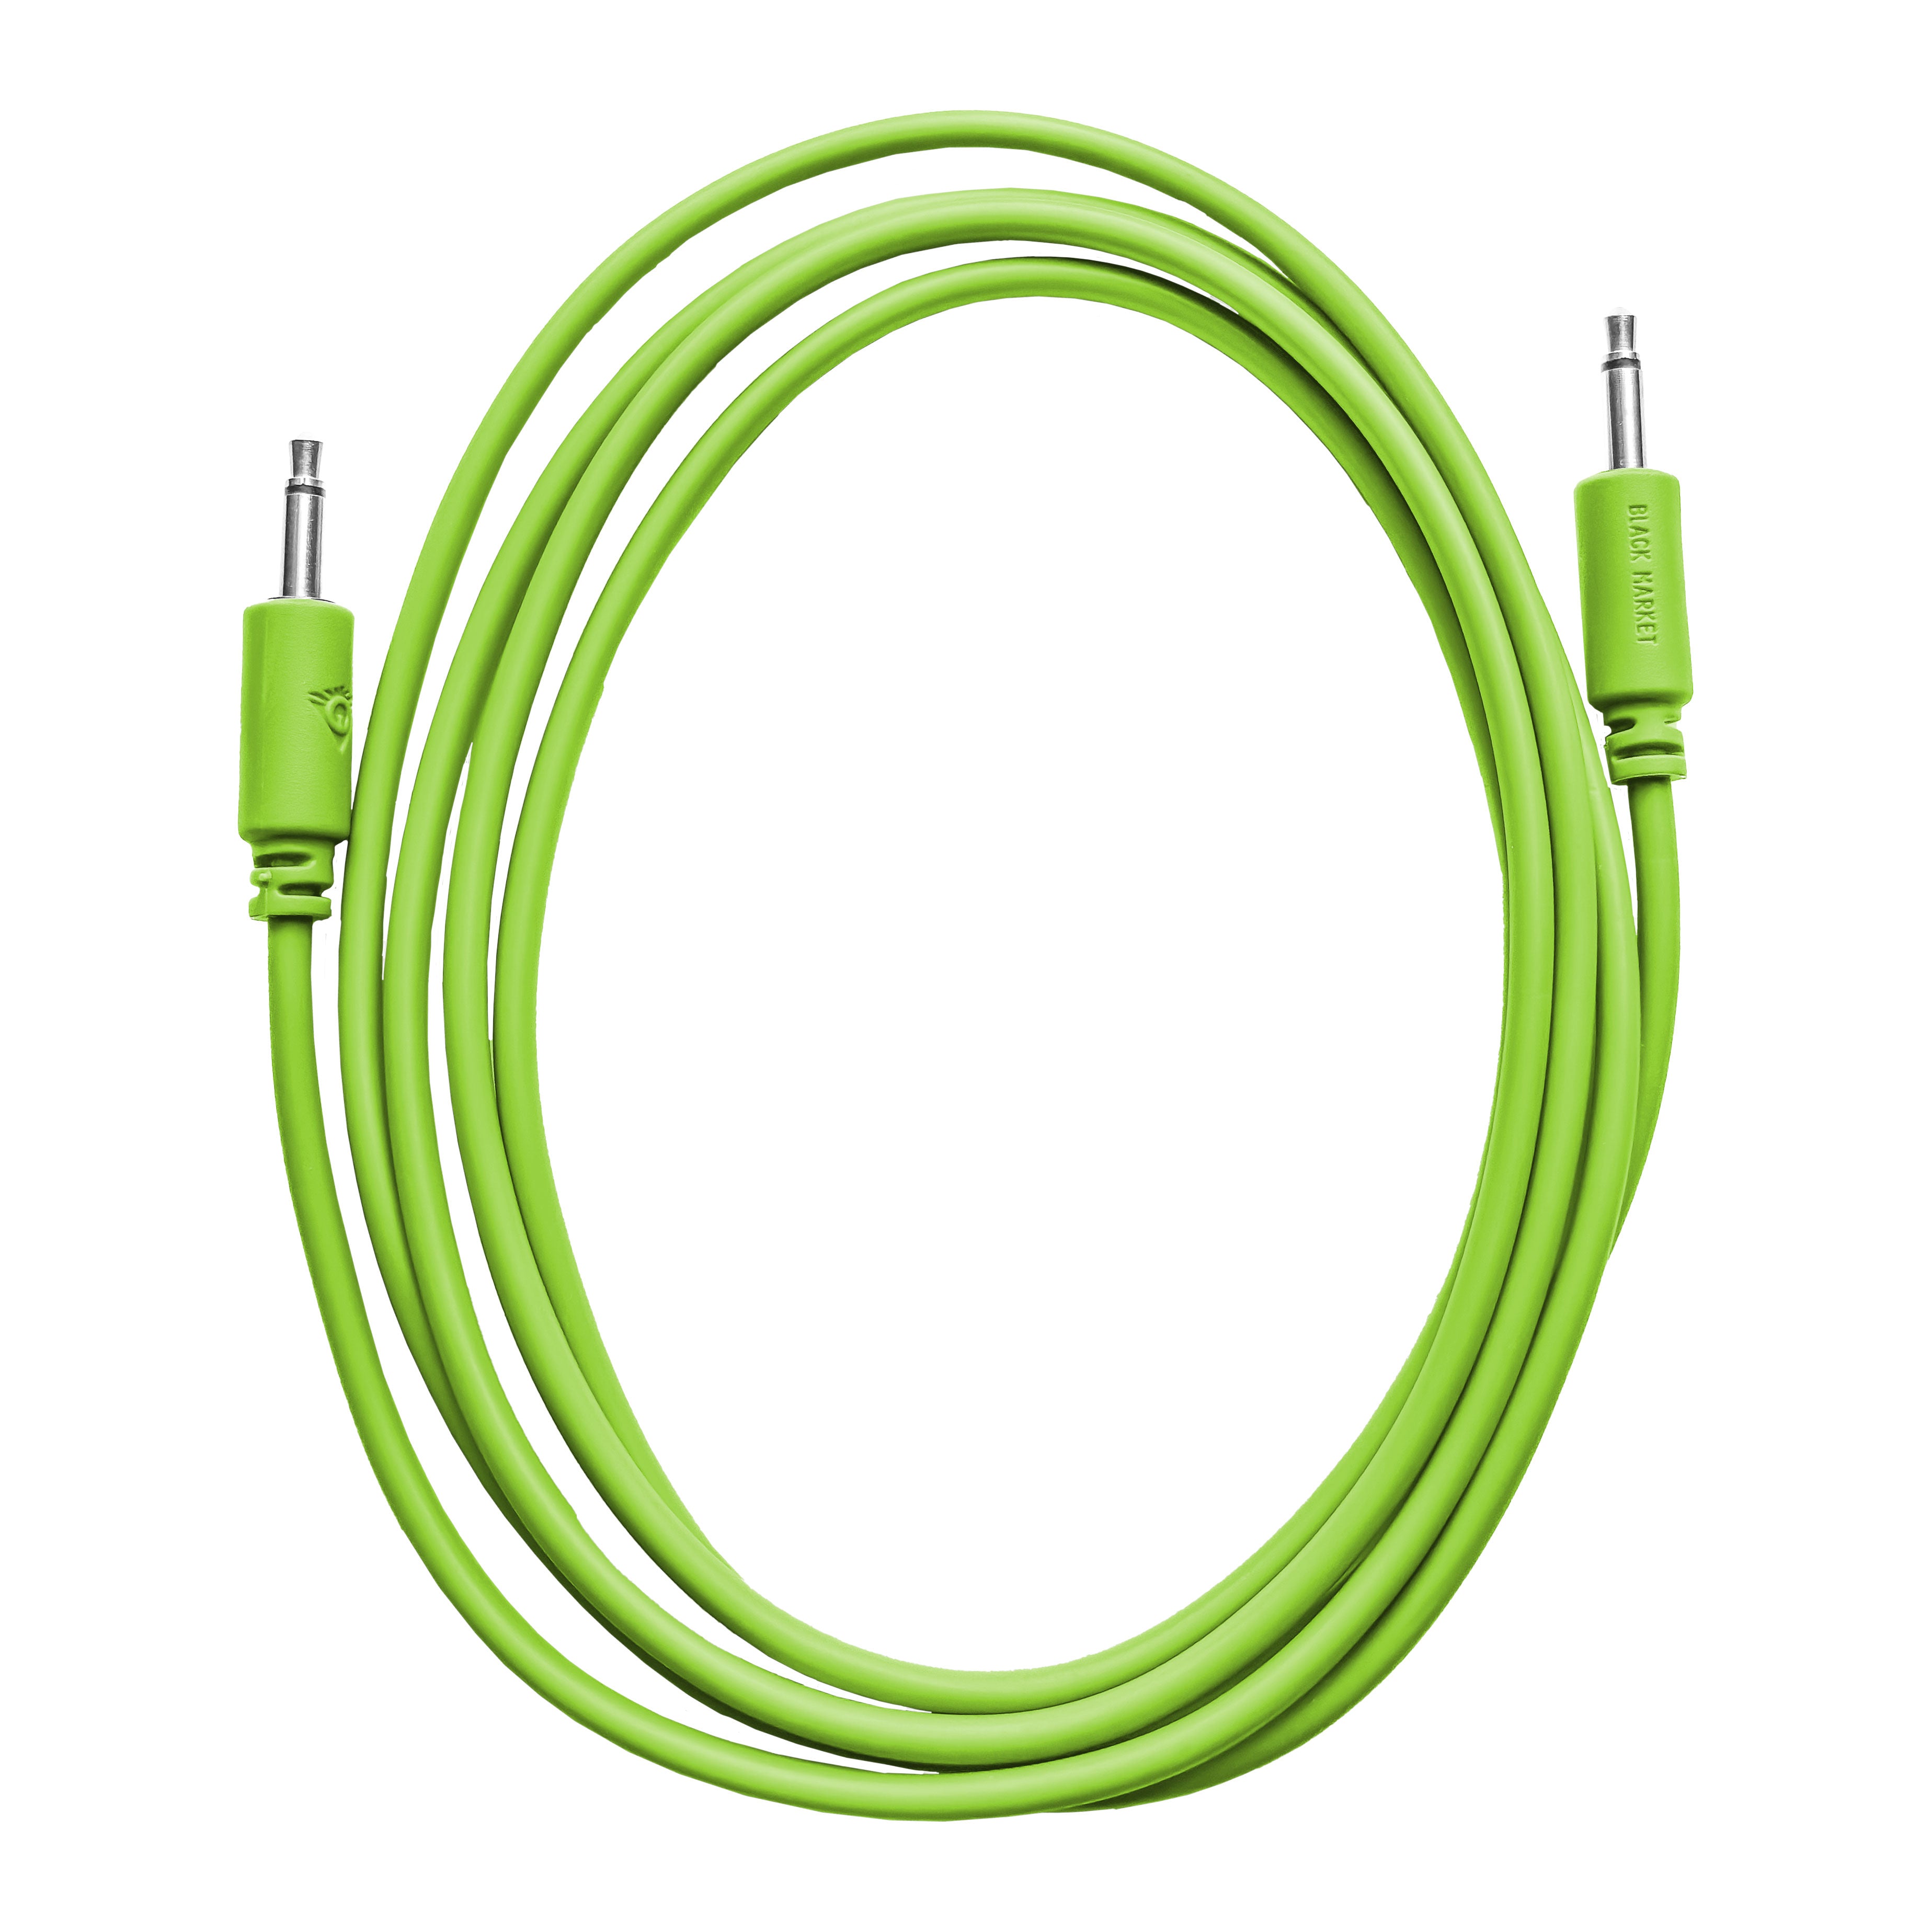 Black Market Modular 3.5mm Patch Cable - 100cm/40" - Glow in the Dark View 1